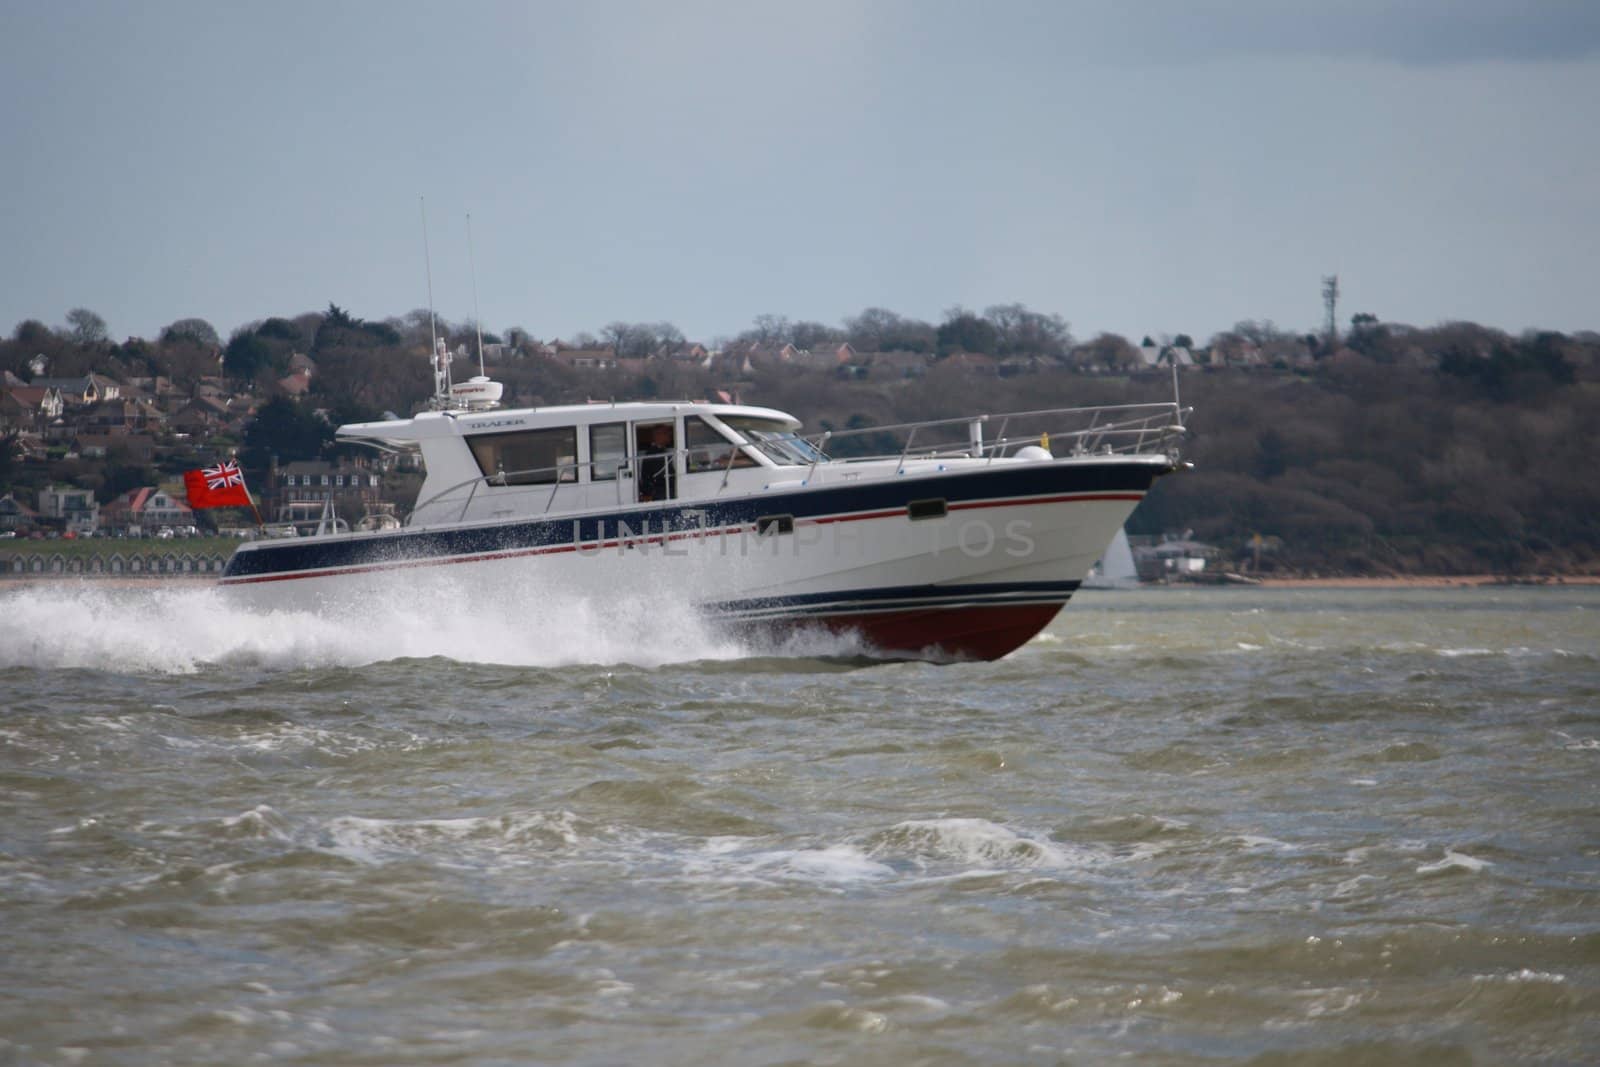 Speed boat on the Solent by chrisga